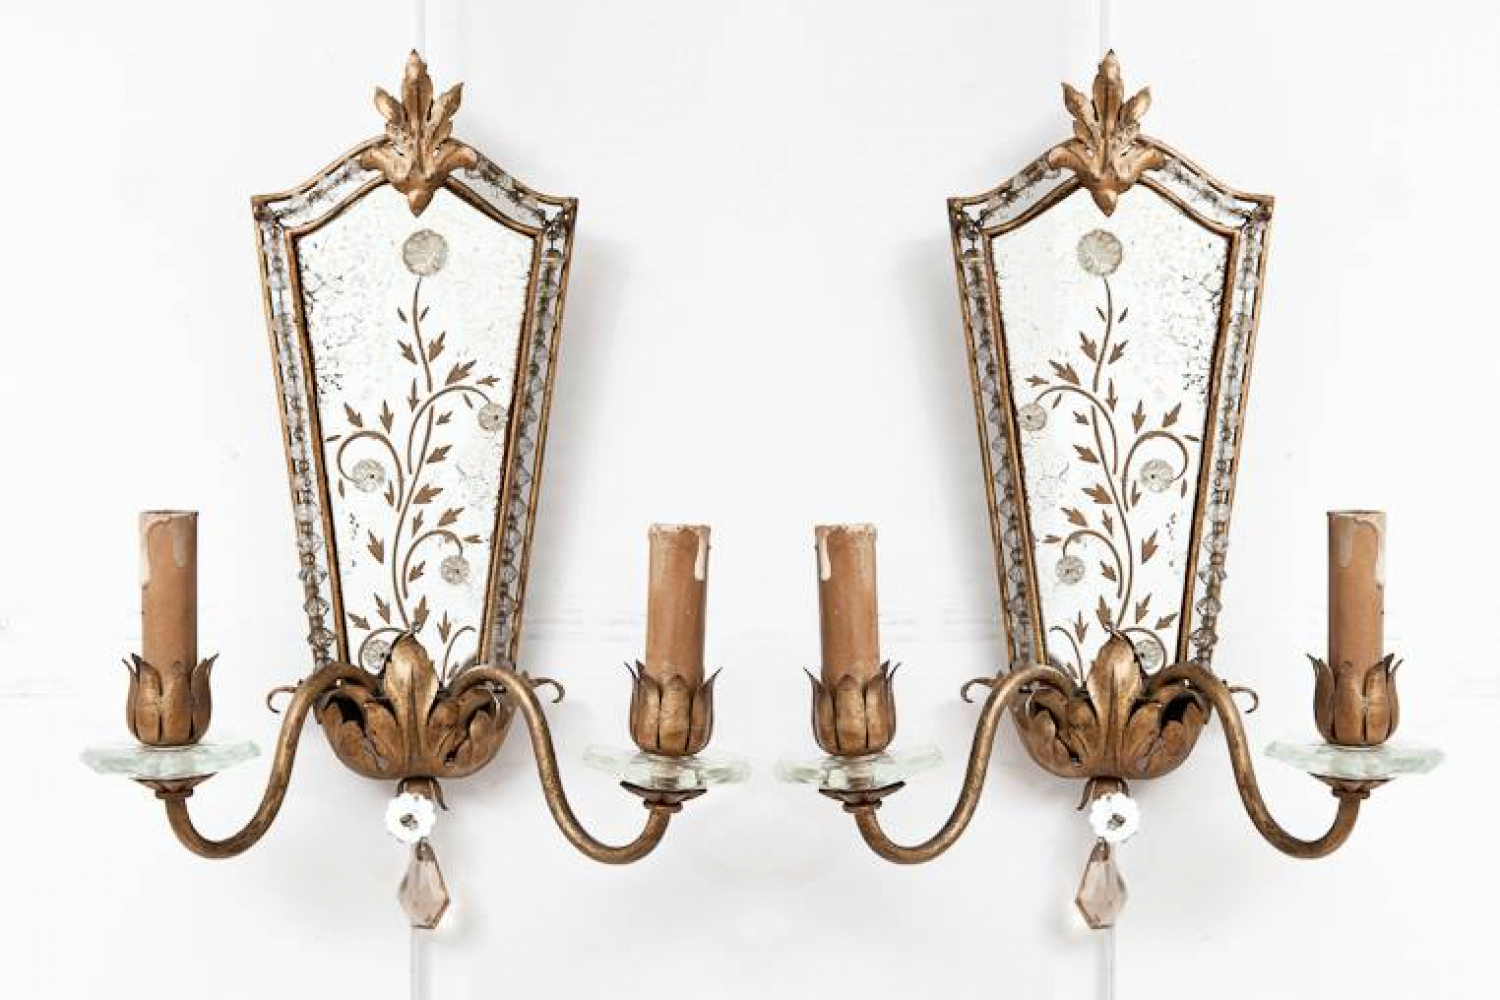 Pair of mirrored wall sconces